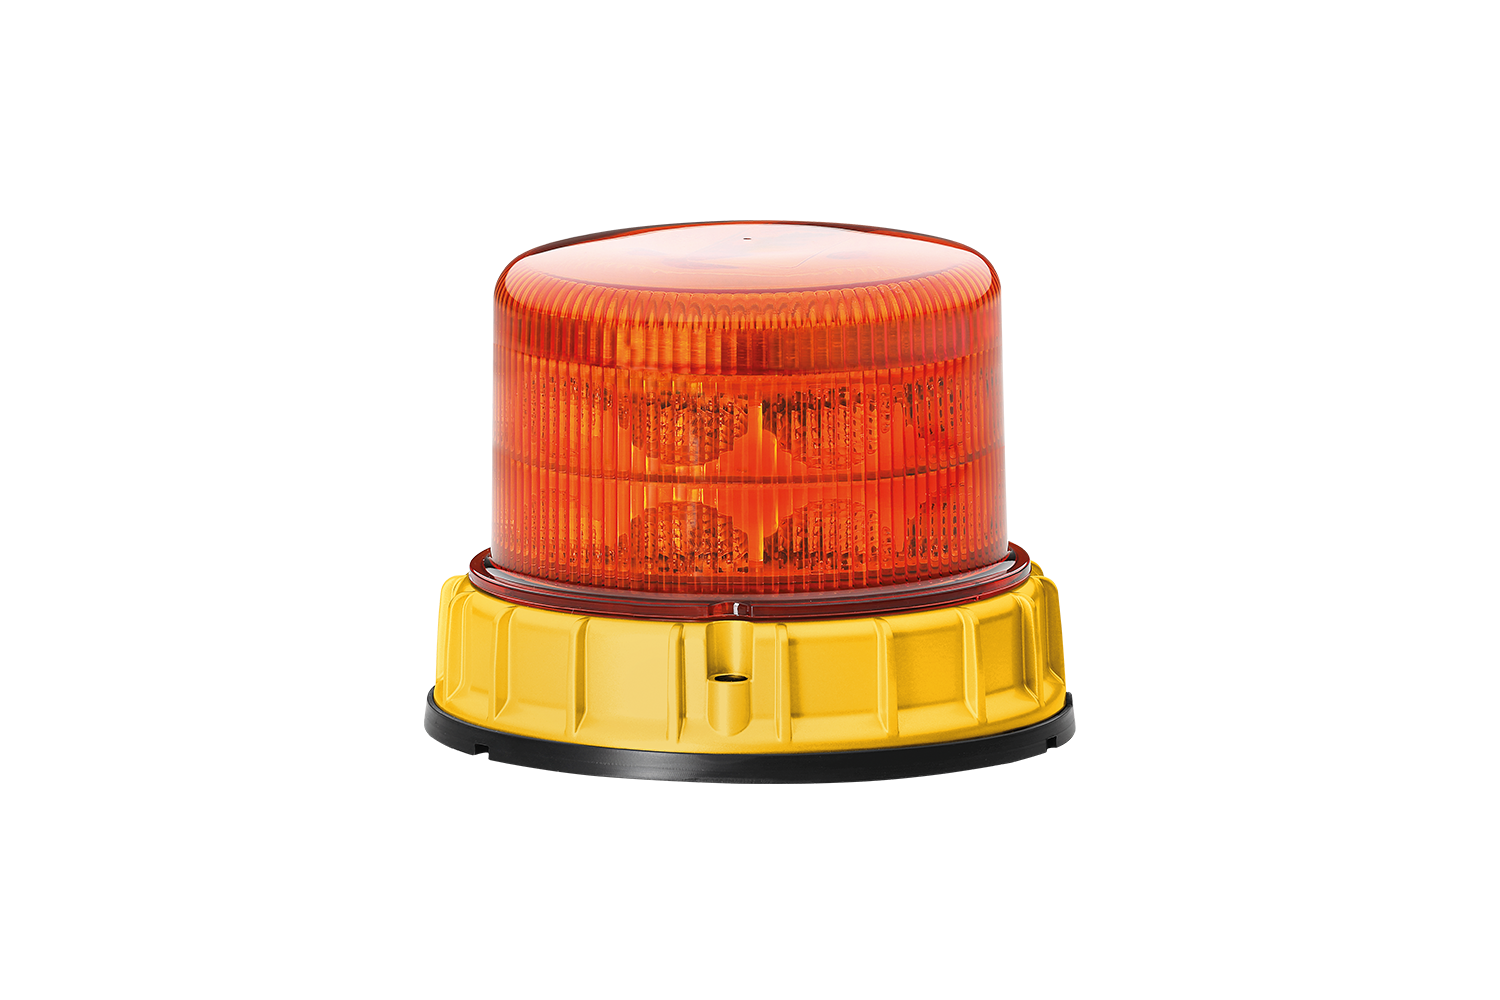 DuraRAY 4.0 warning lamp from Hella offered by Patlon